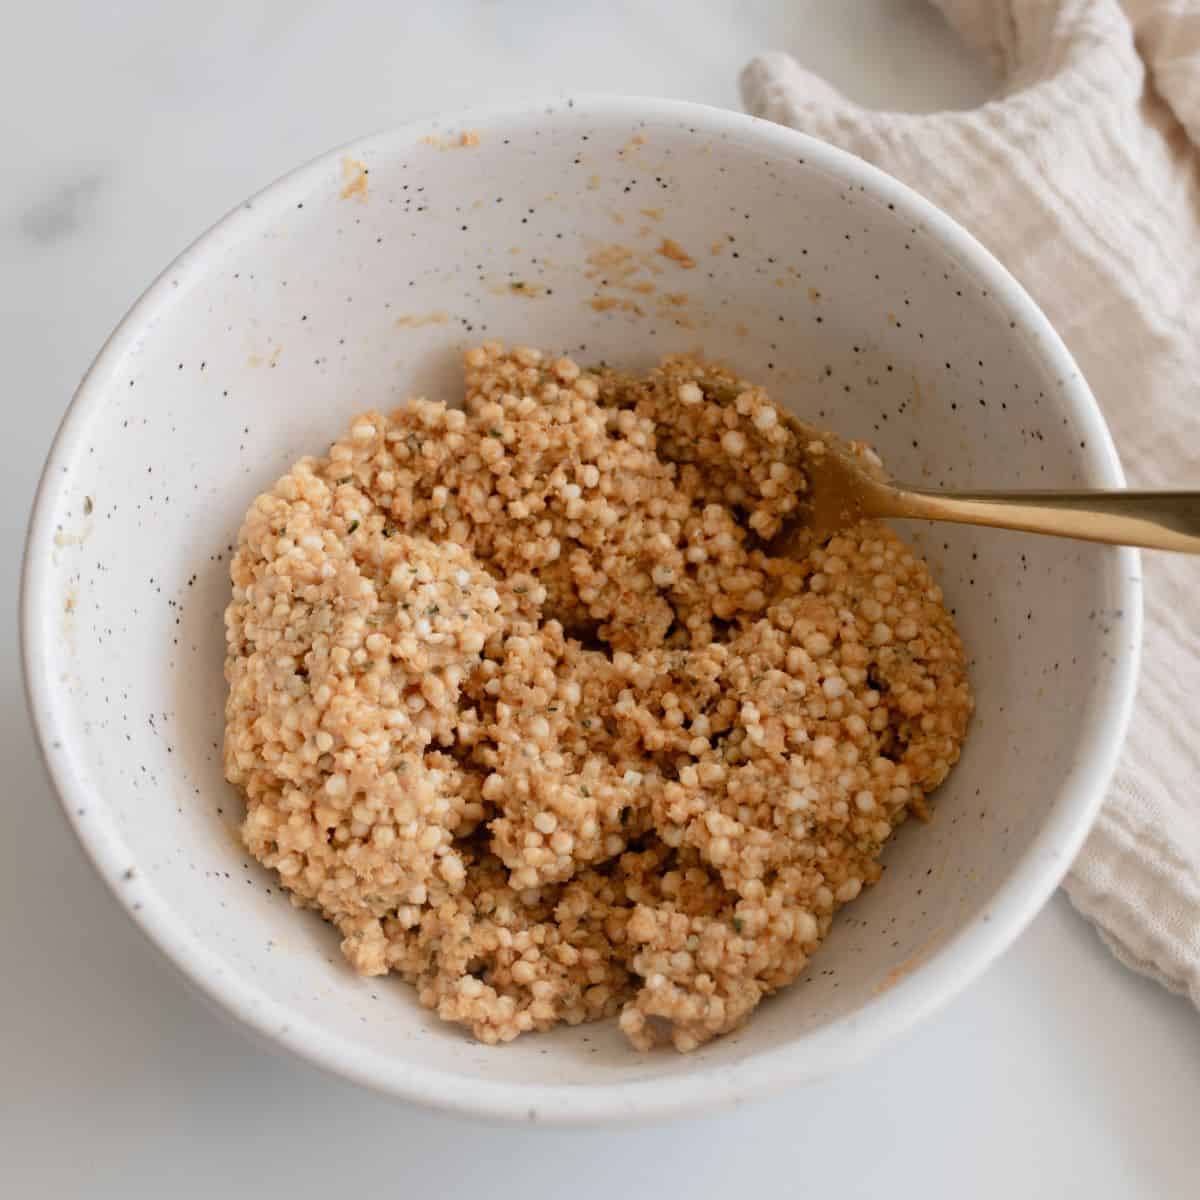 All ingredients mixed together for quinoa bites in a ceramic mixing bowl.